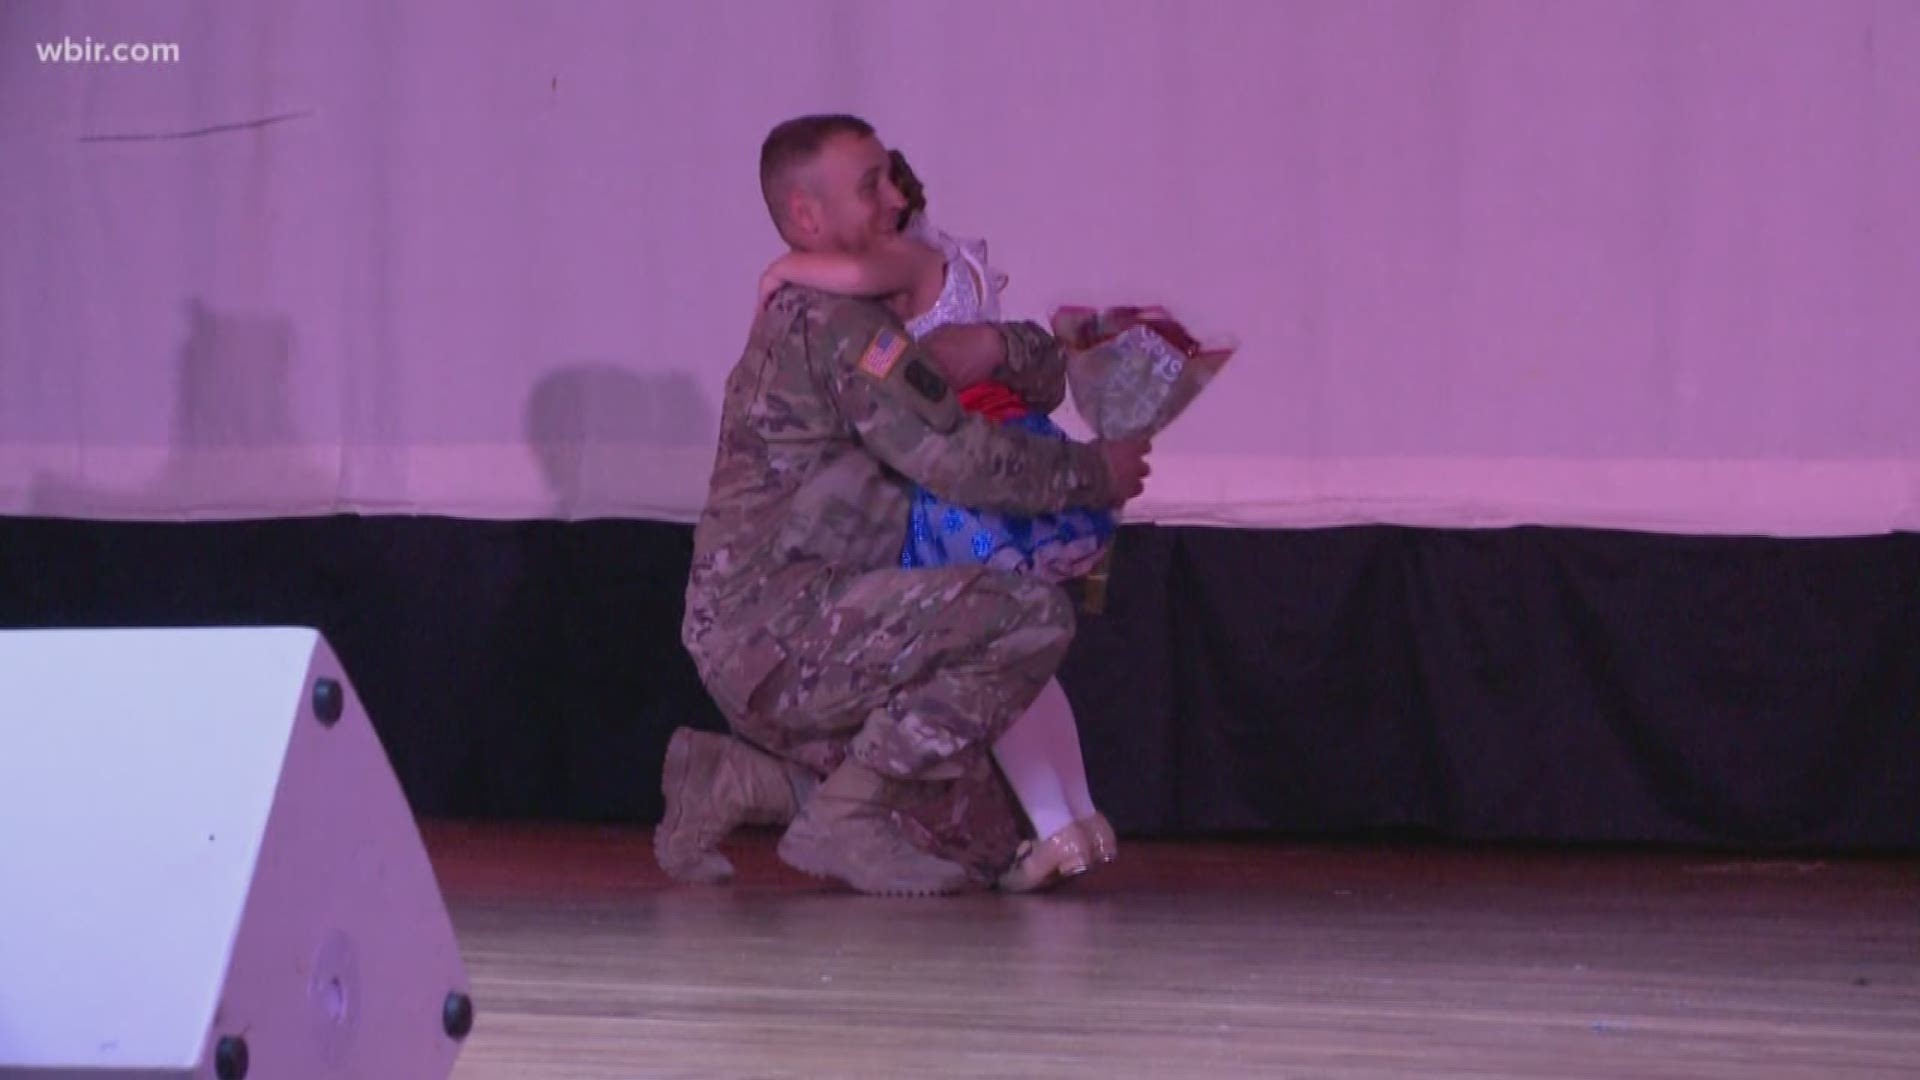 Seven-year-old Ansley Bottoms hasn't seen her dad in a year while he was deployed overseas.